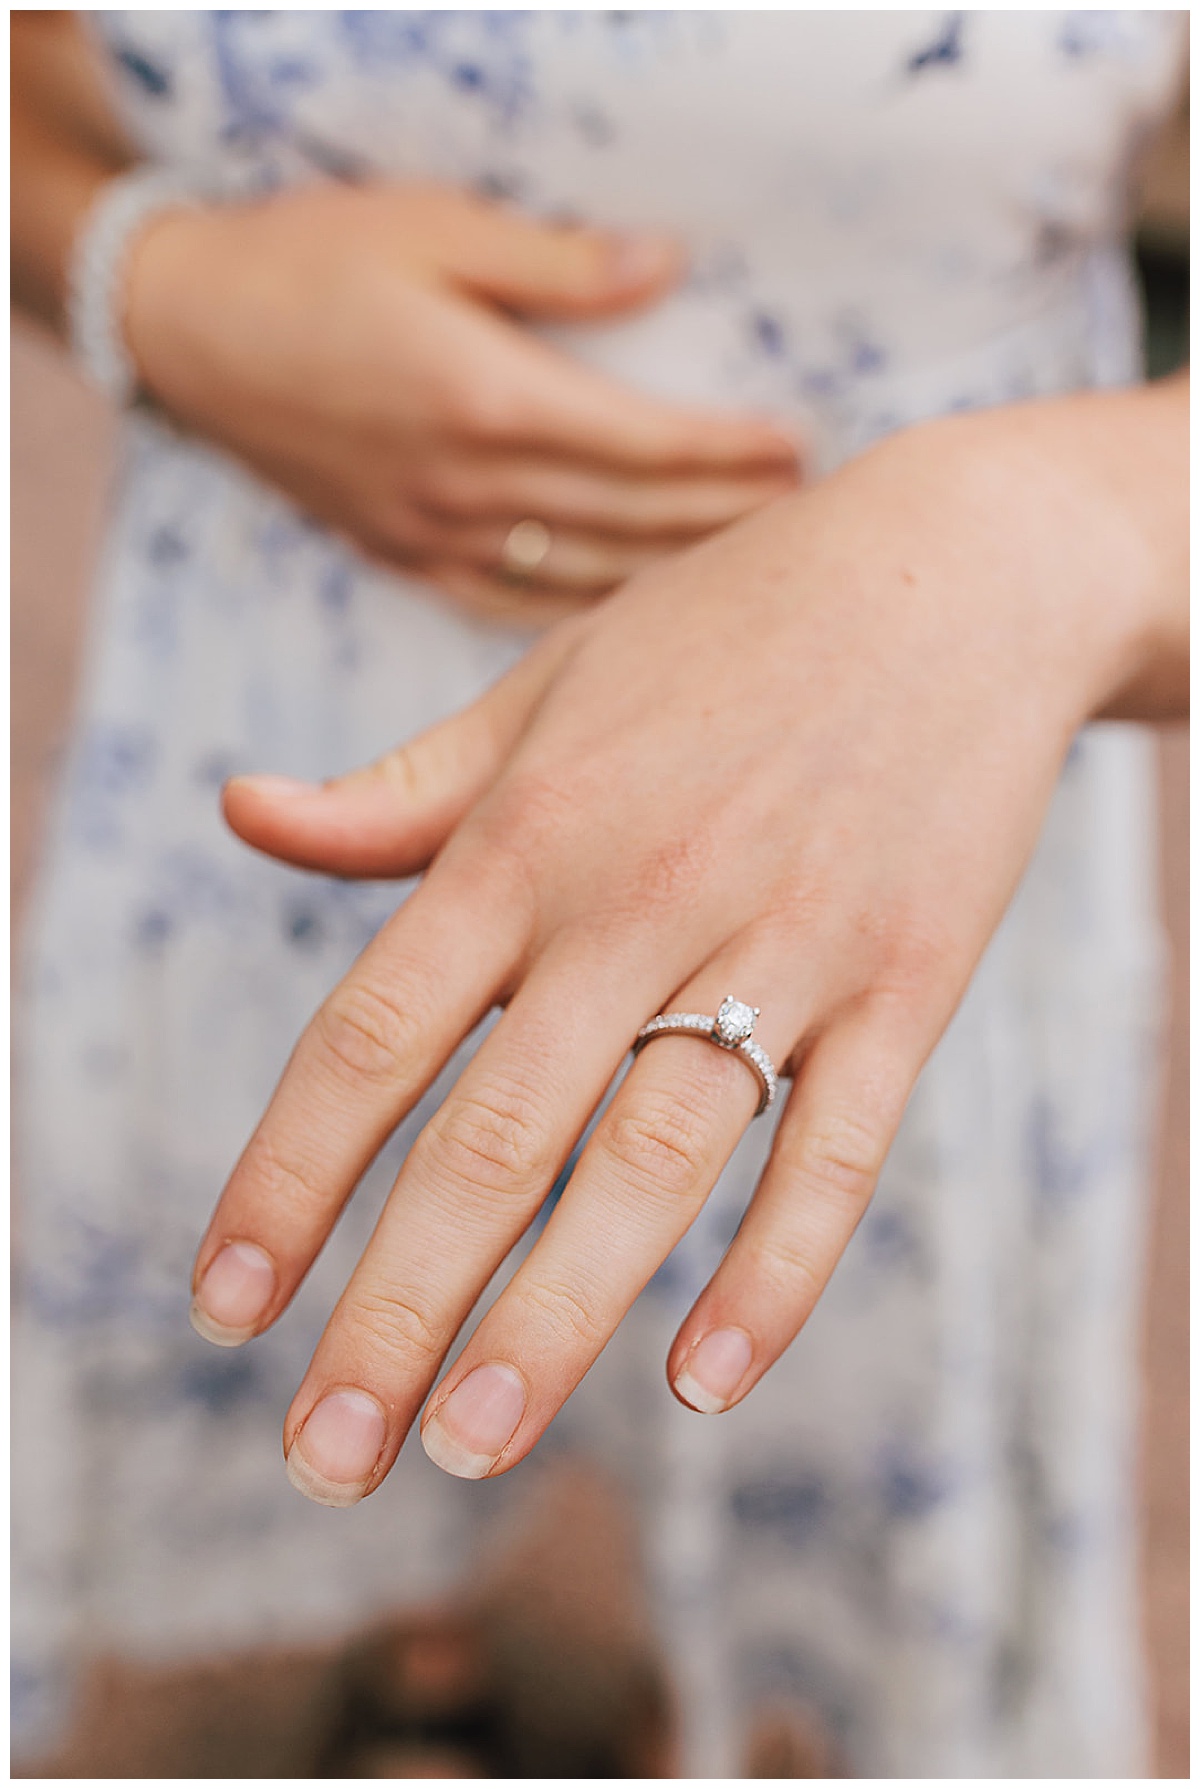 Up close and personal with beautiful engagement ring by Kayla Bouren Photography